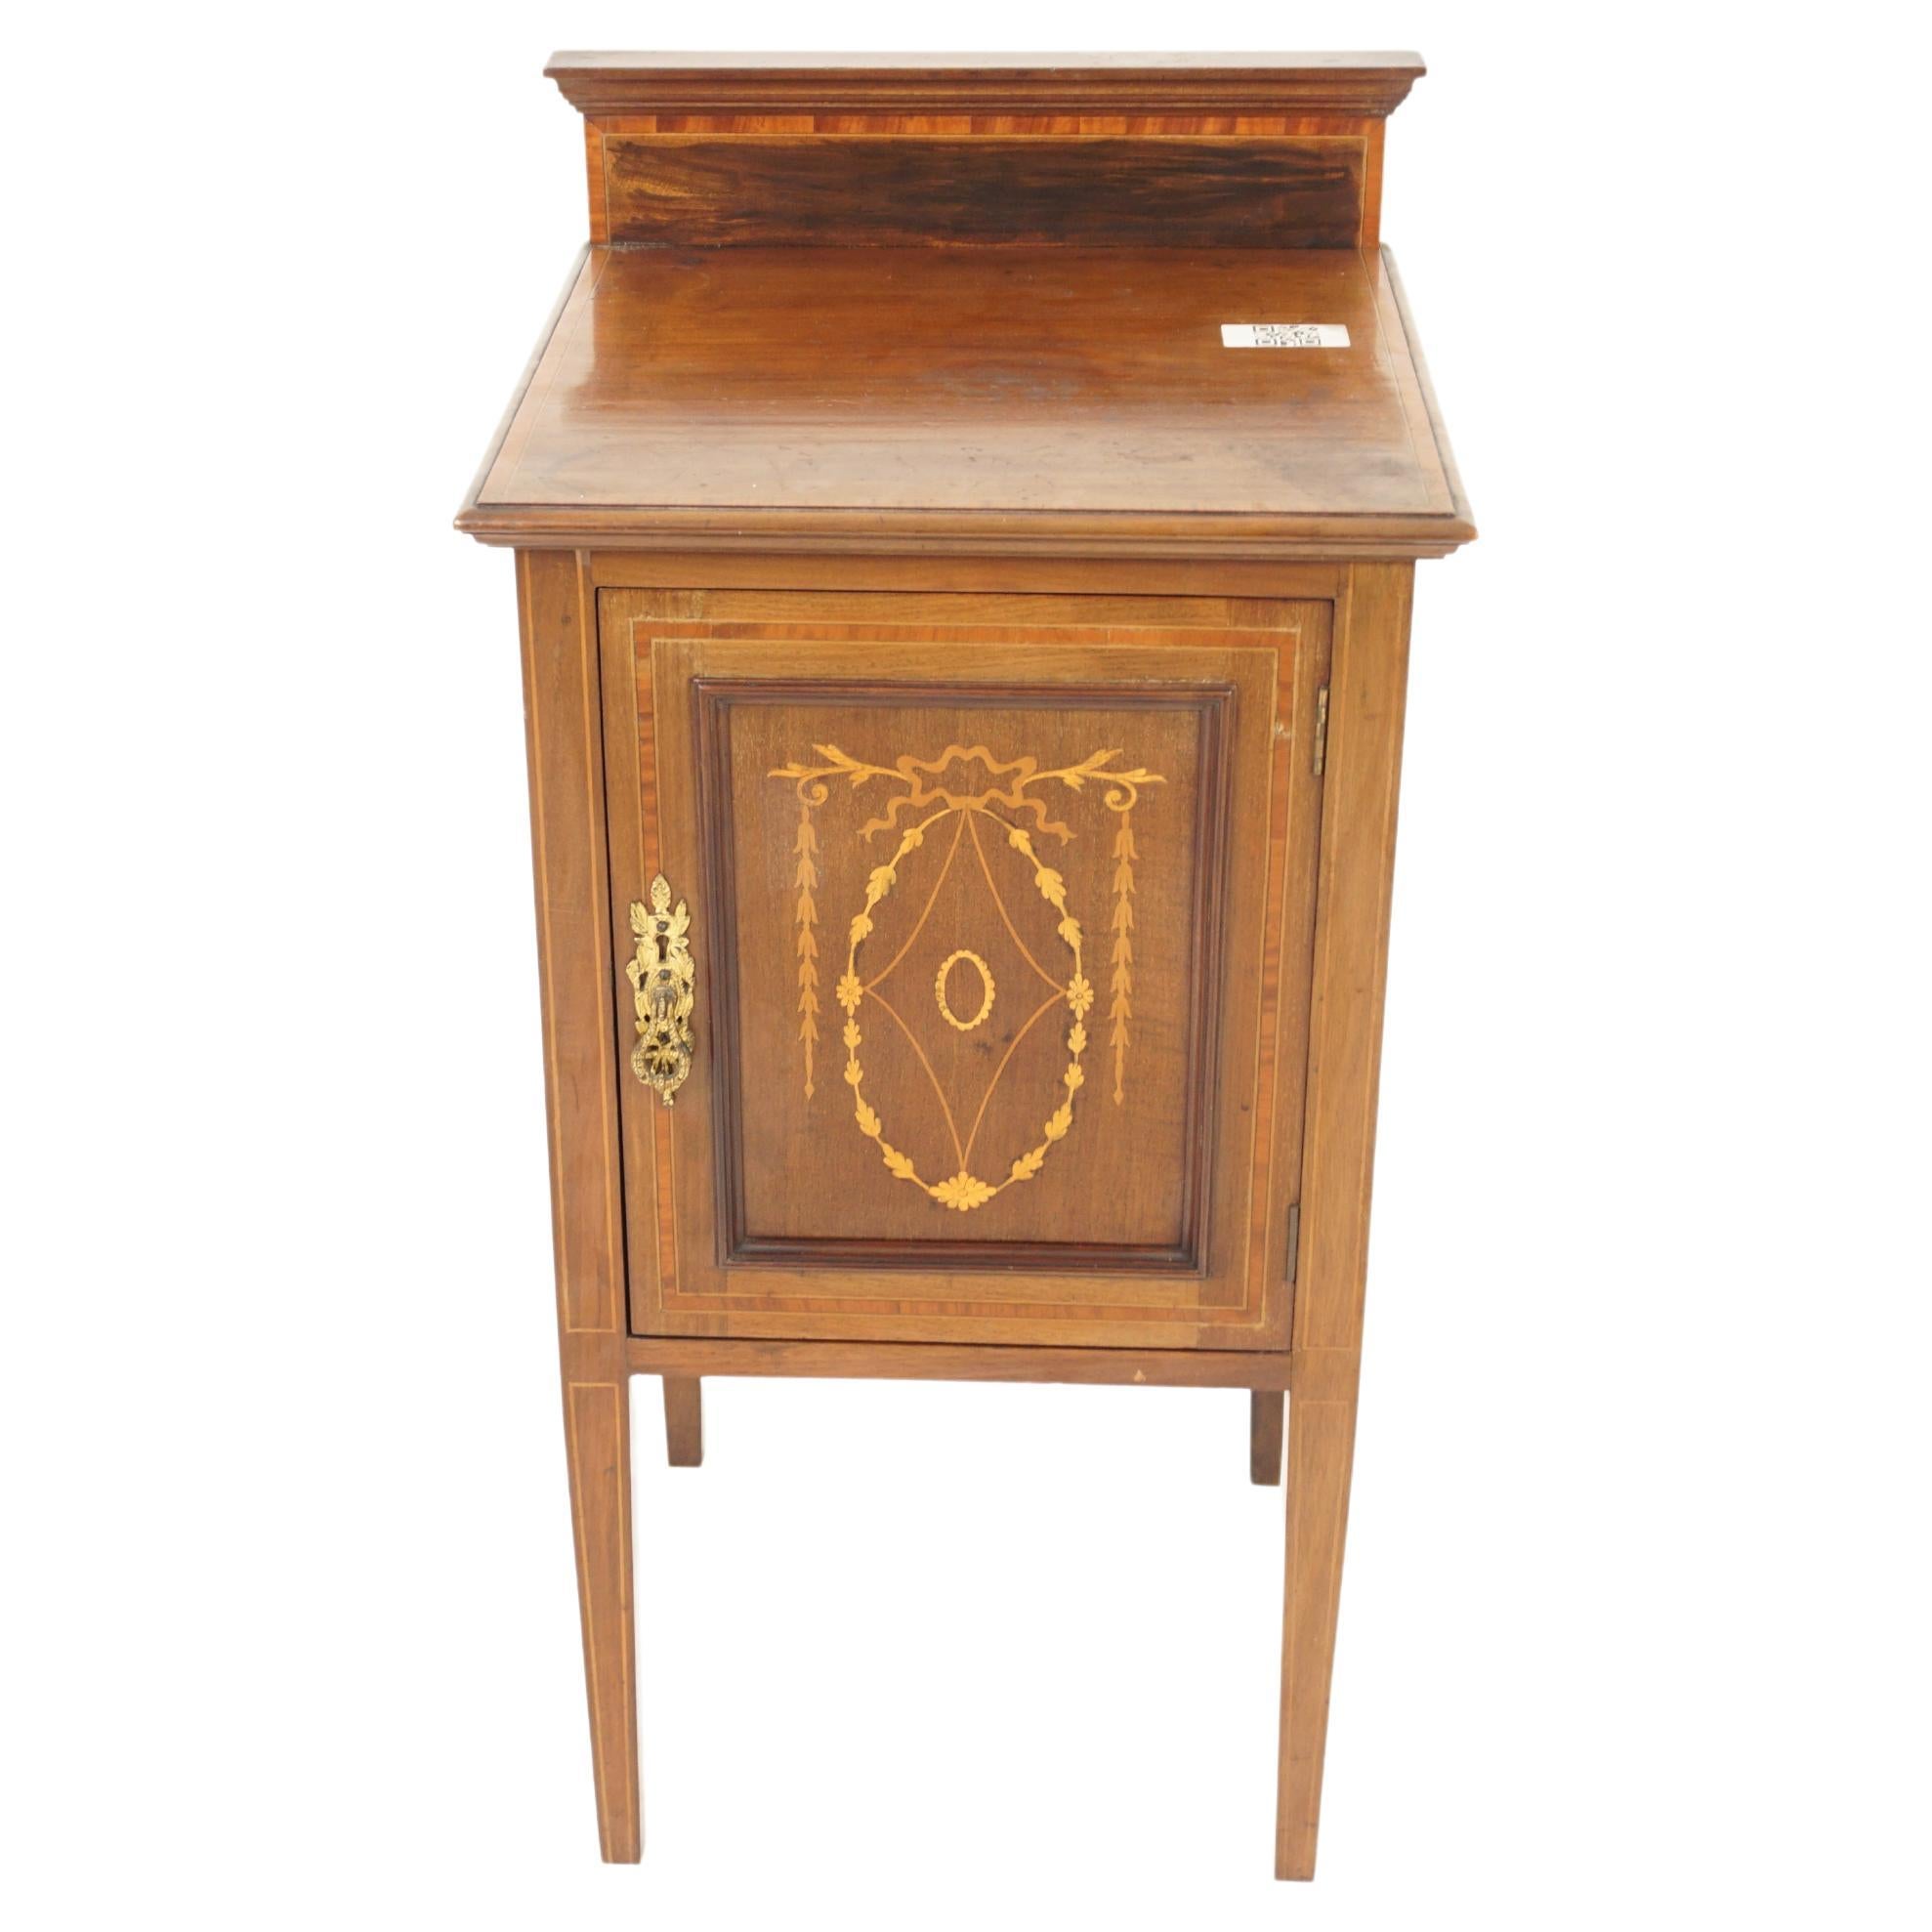 Antique Inlaid Walnut Nightstand, Sheraton Bedside Table, Scotland 1900, H969